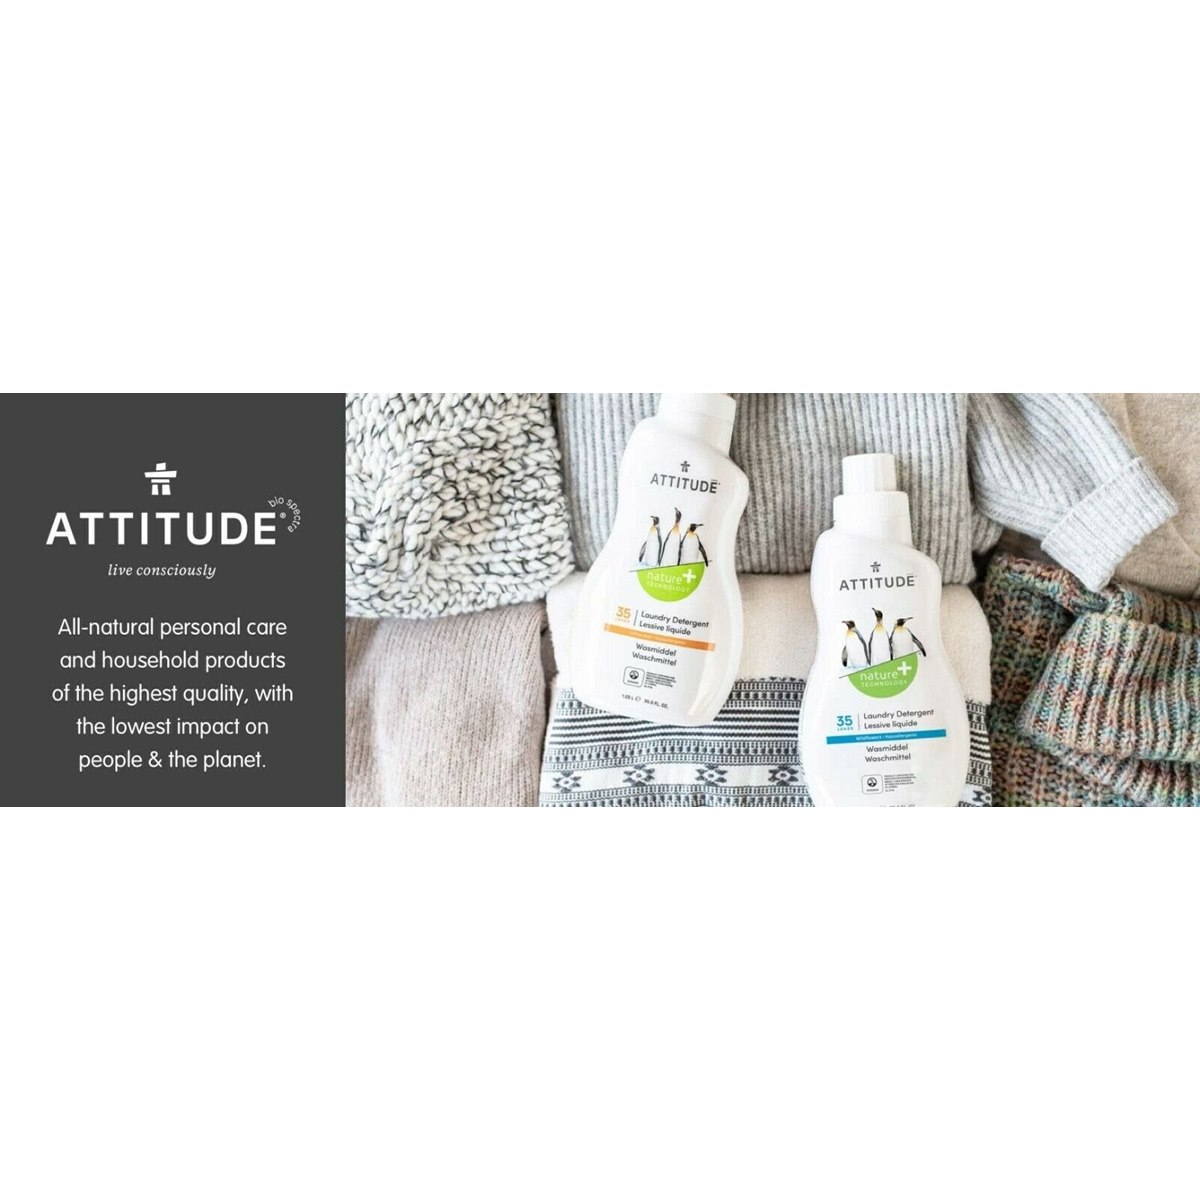 Where to Buy Attitude Products Online